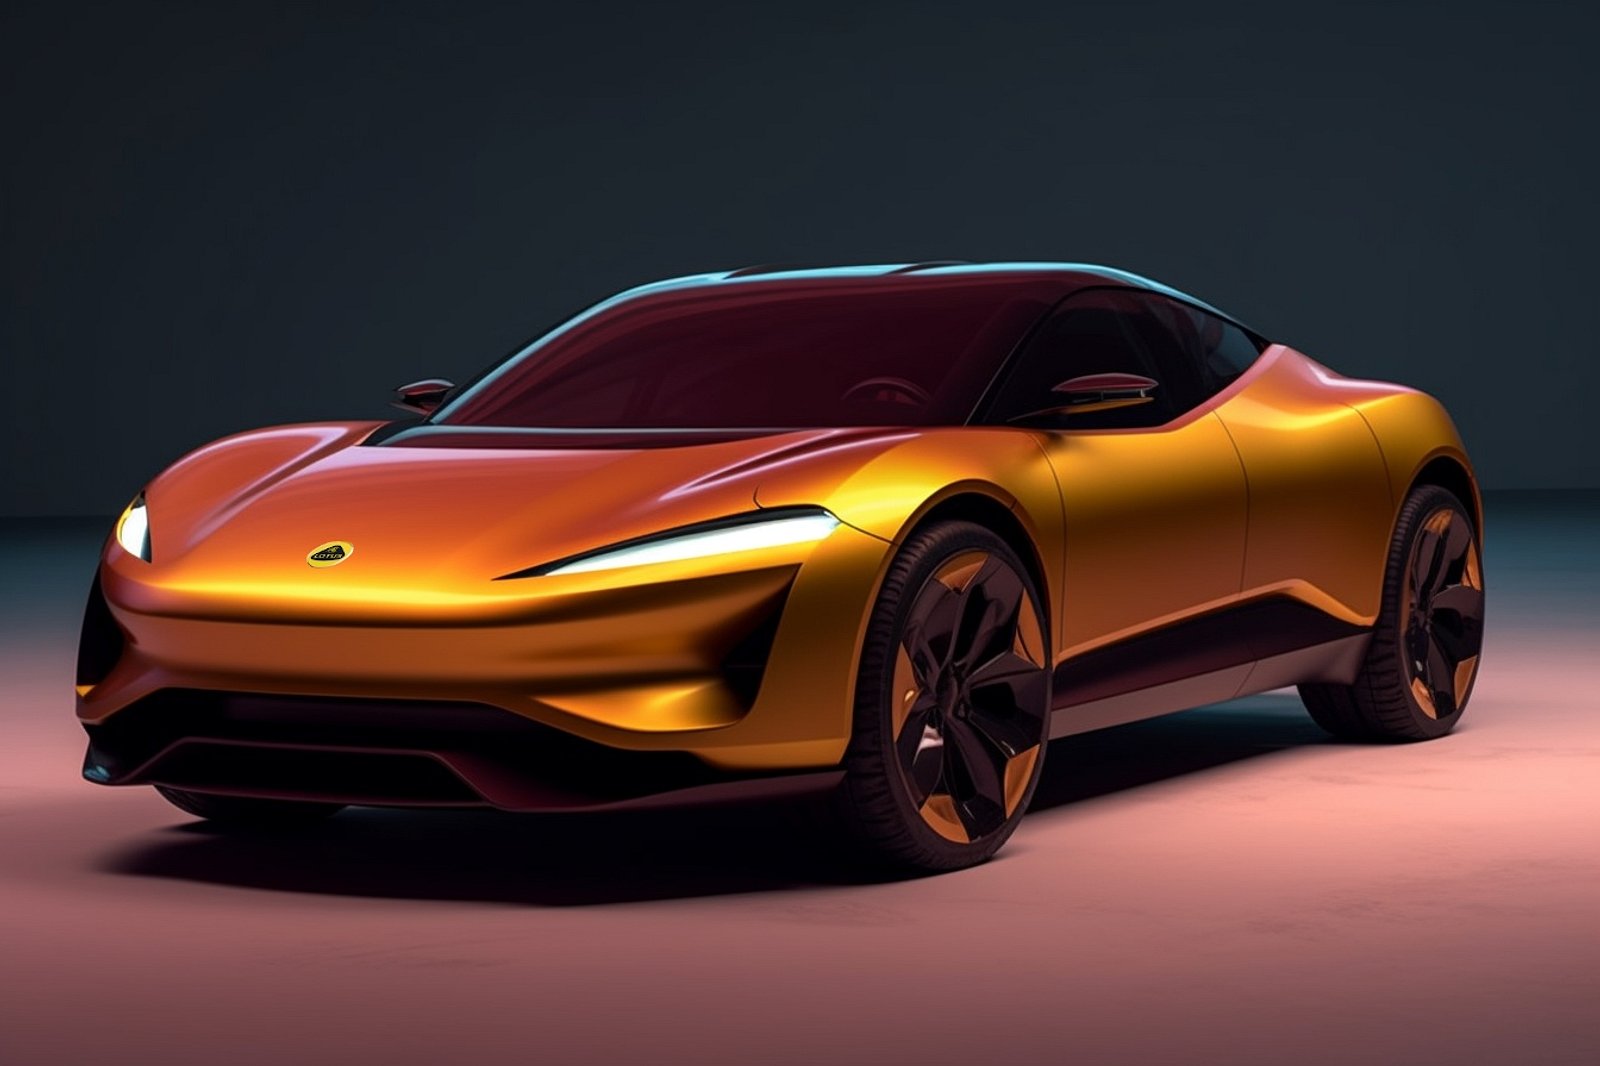 Lotus Emeya X Coming To Blow The Porsche Taycan Out Of The Water